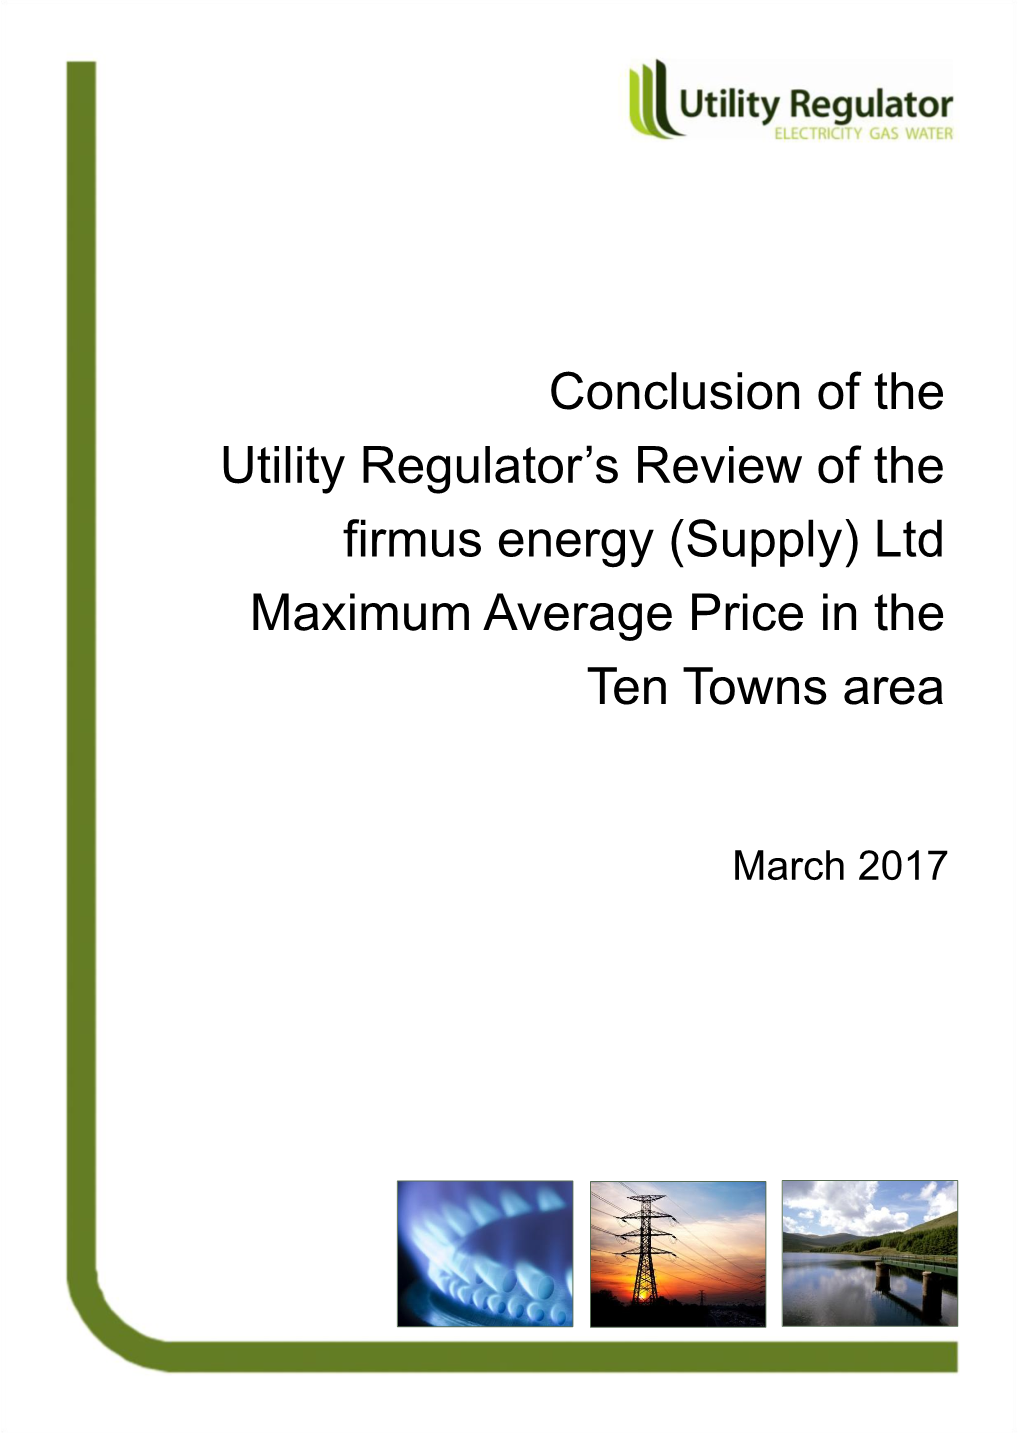 Conclusion of the Utility Regulator's Review of the Firmus Energy